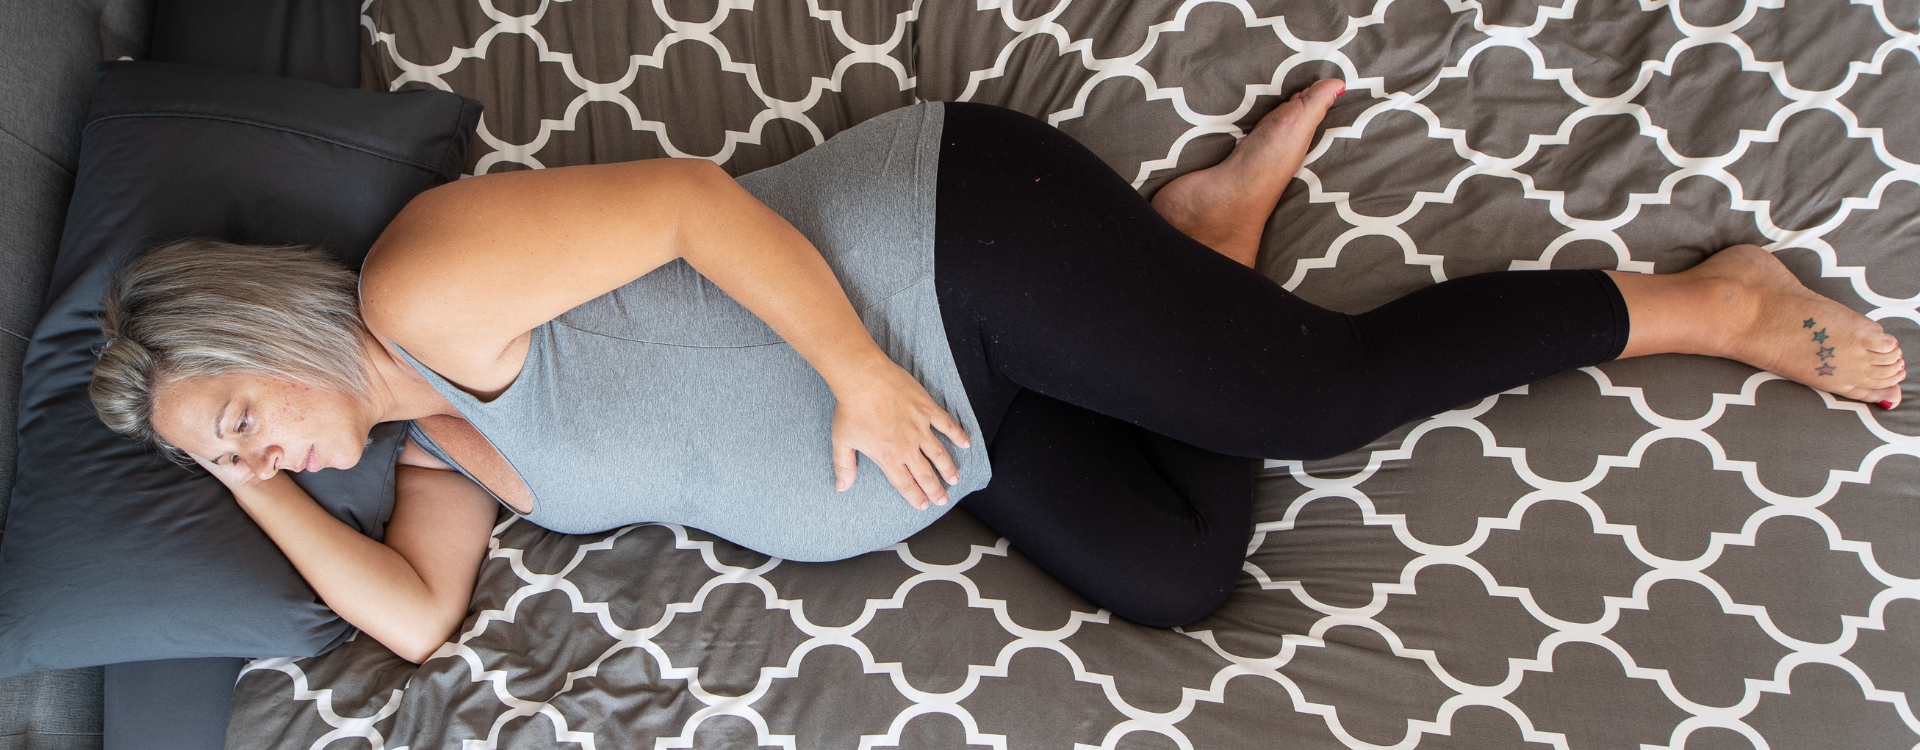 Sleep During Pregnancy: How To Sleep When Pregnant